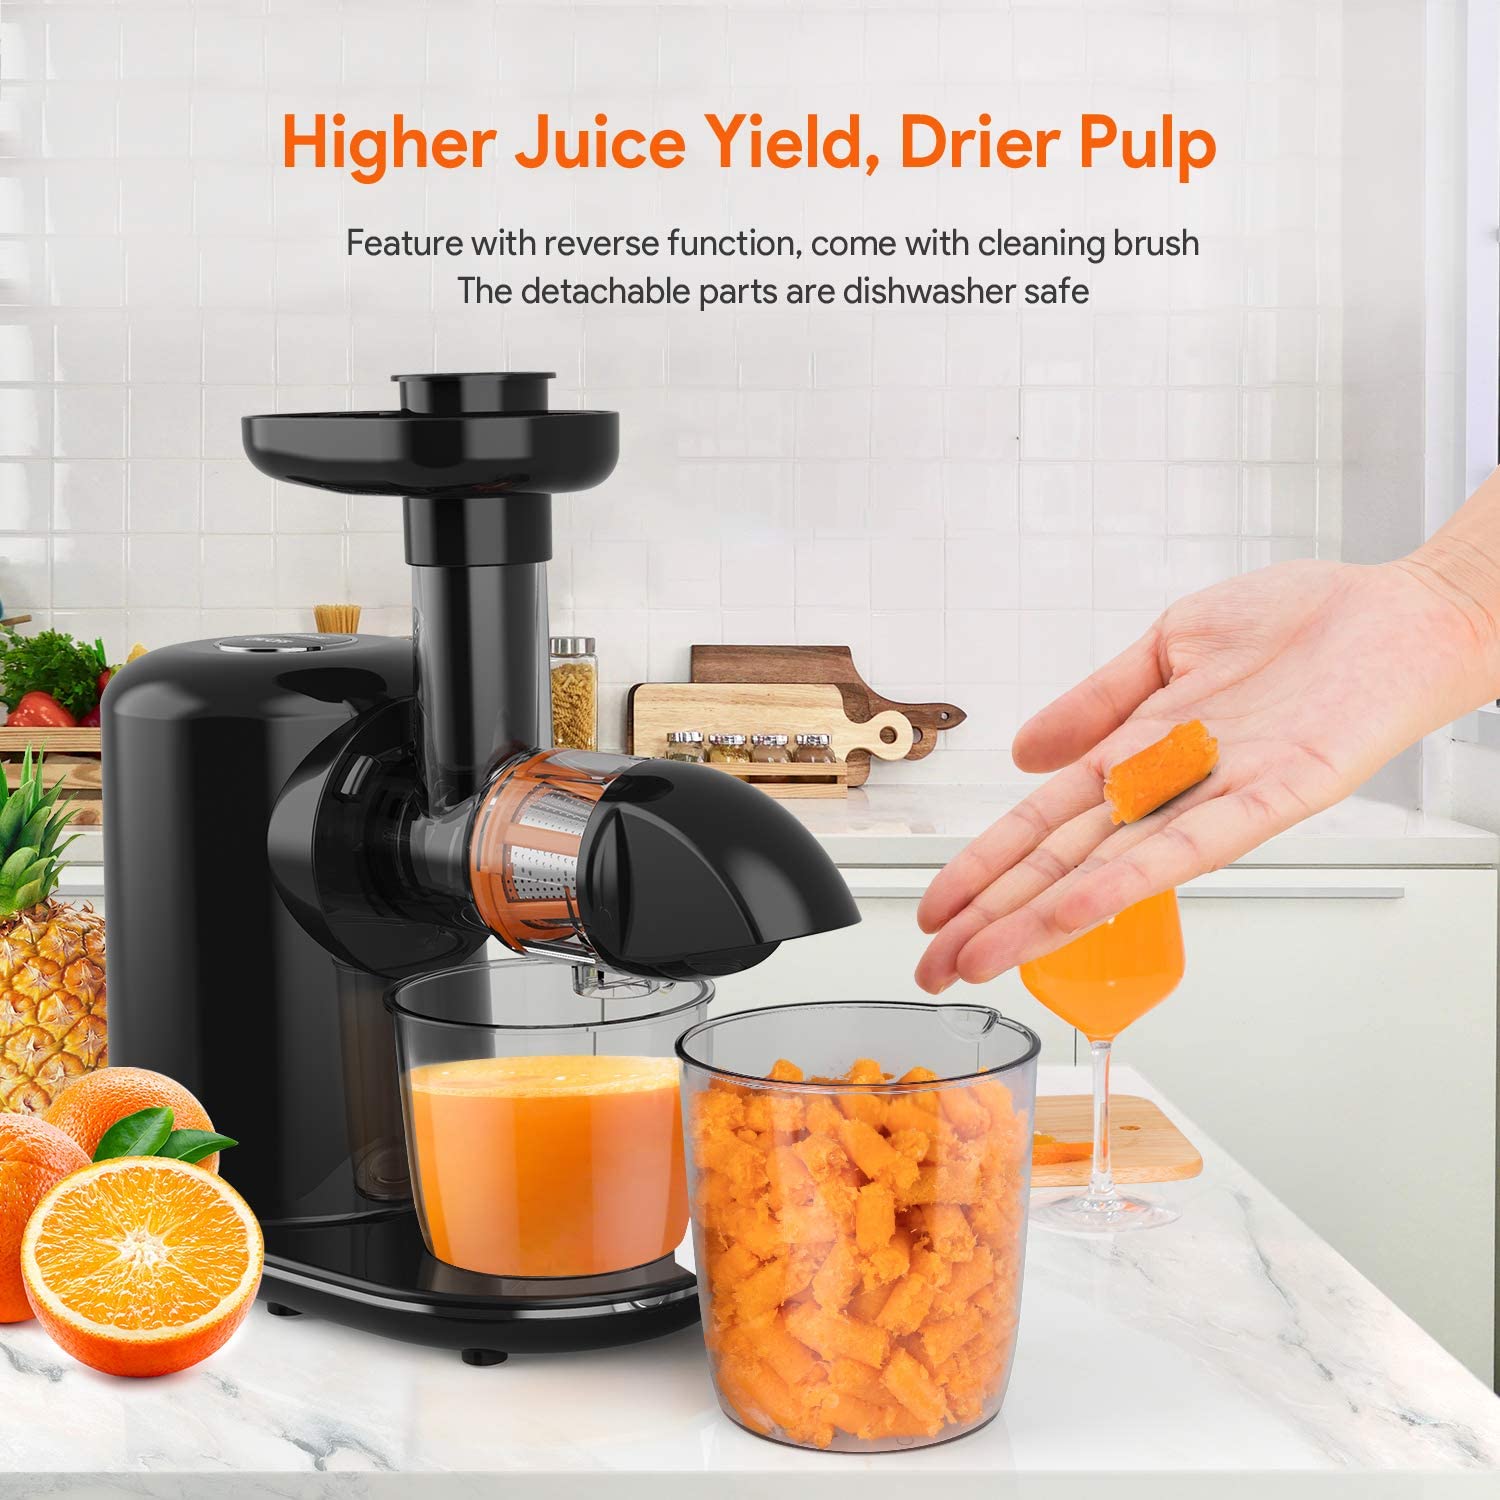 Easy to Use and Clean Higher Juice Yield and Drier Pulp BPA-Free 150-Watt For Vegetables and Fruits Juicer Machines Bagotte Slow Masticating Juicer Extractor Quiet Motor & Reverse Function 